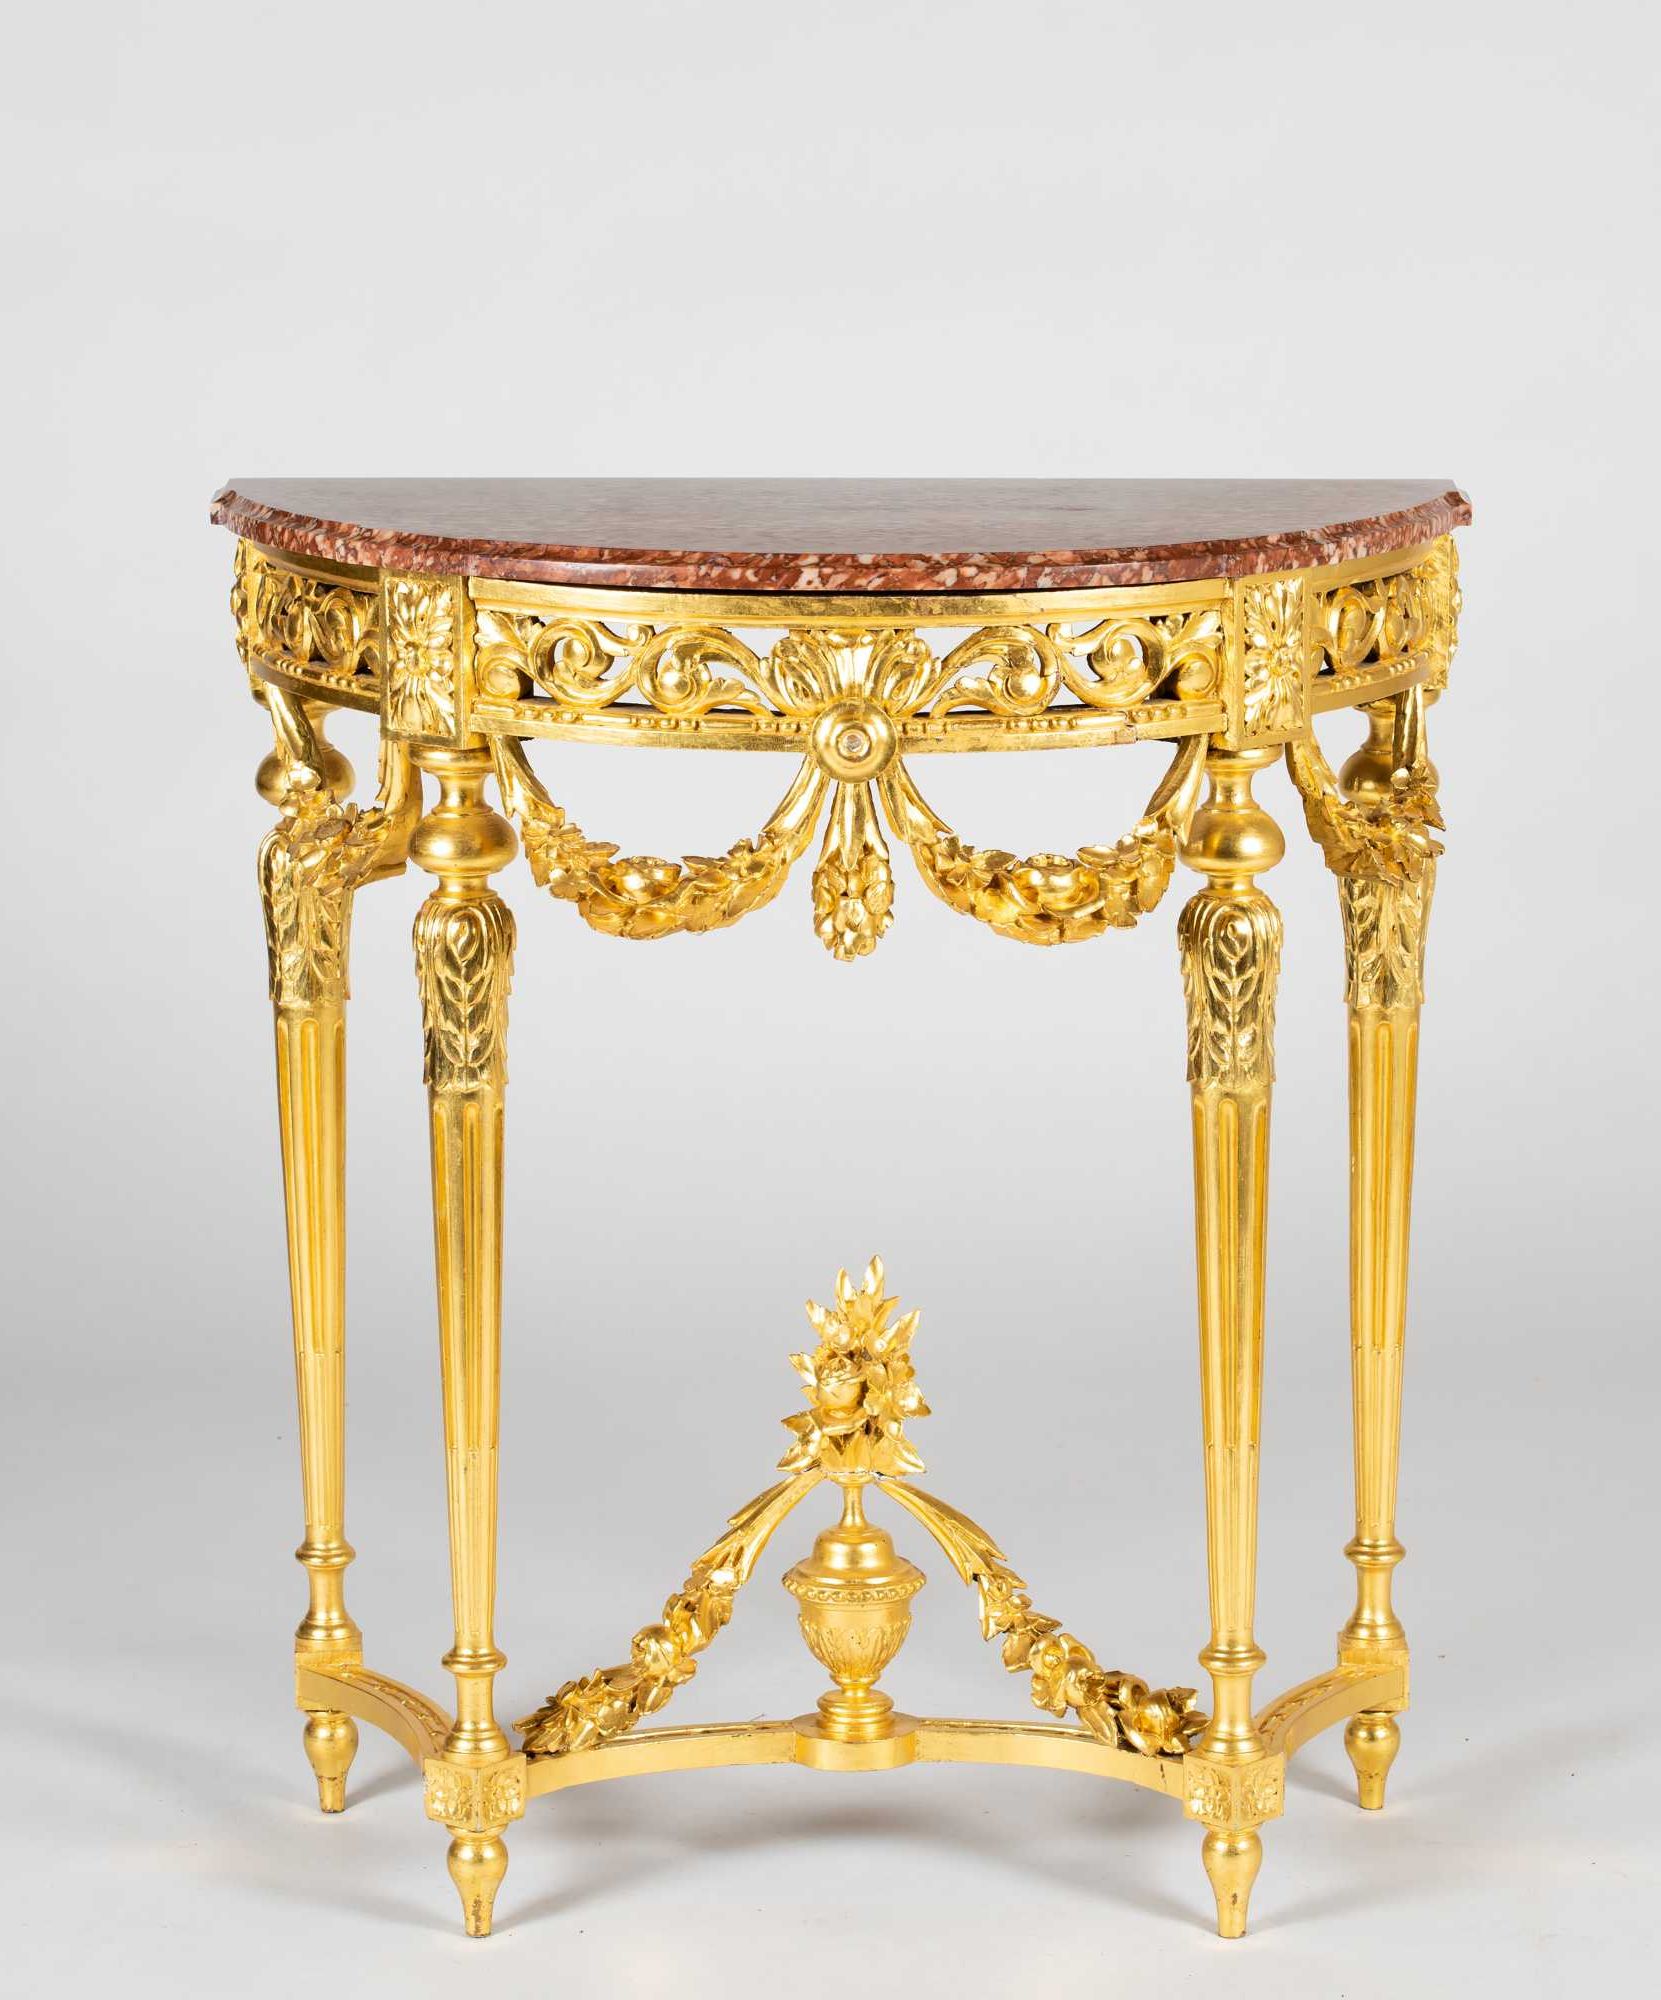 Small French Marble Top Gilded And Carved Console Table In Fashionable Marble Top Console Tables (View 7 of 10)